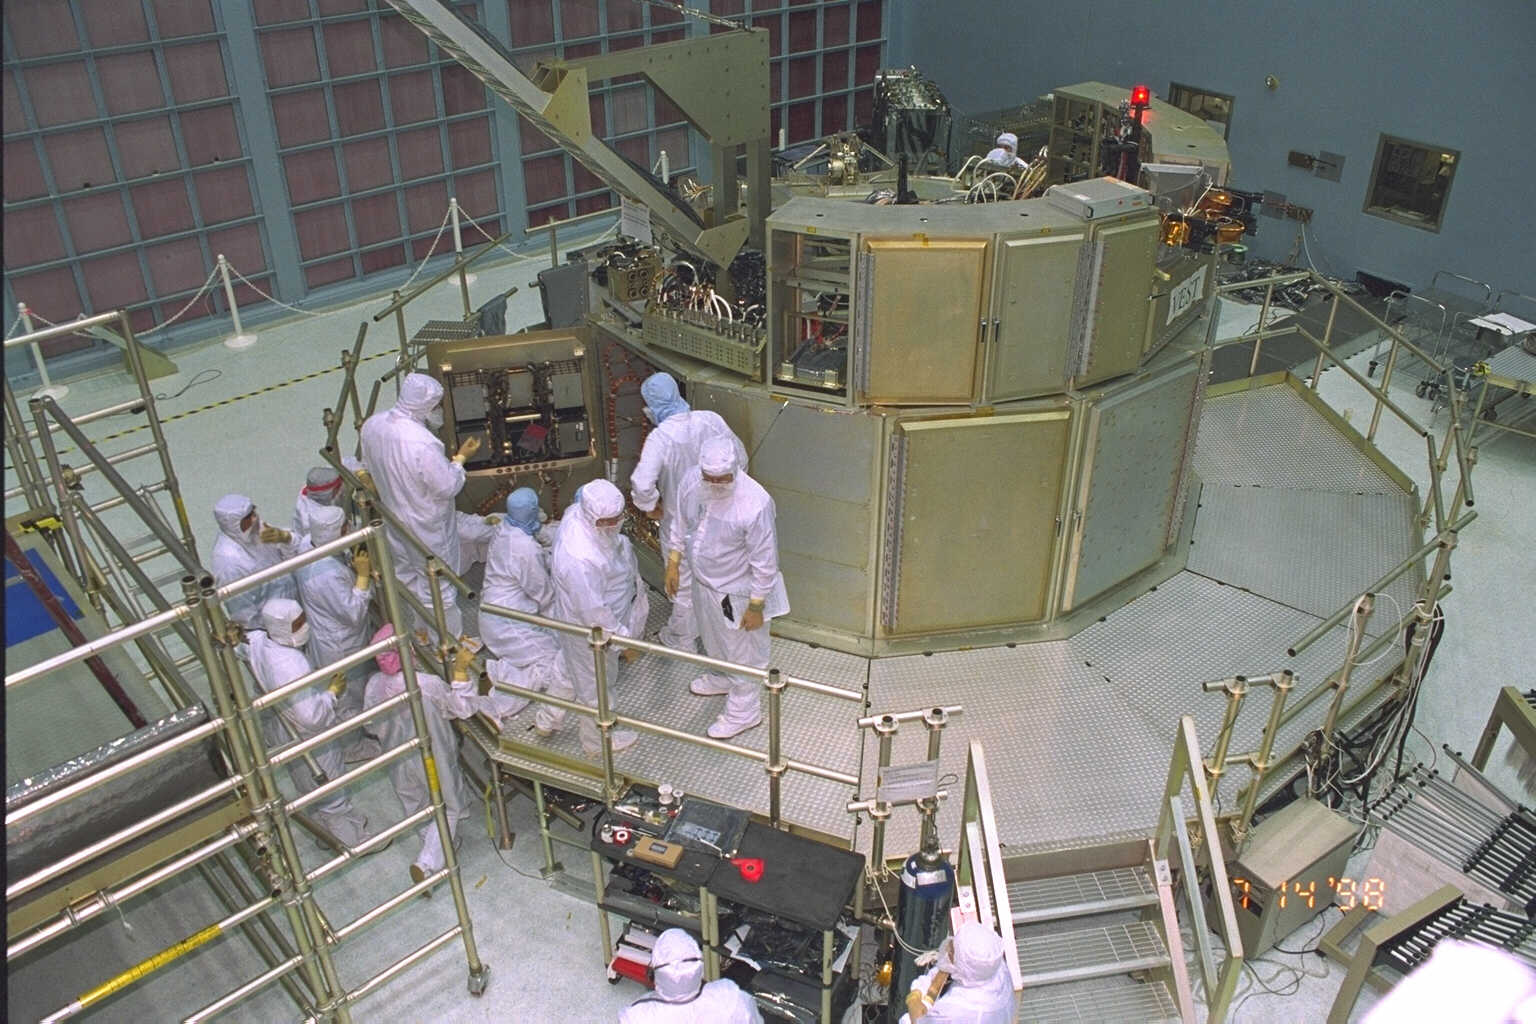 Astronauts standing around the VEST, in their full-body bunny suits. astronauts are seen receiving instruction from Hubble project personnel on various spacecraft subsystems.